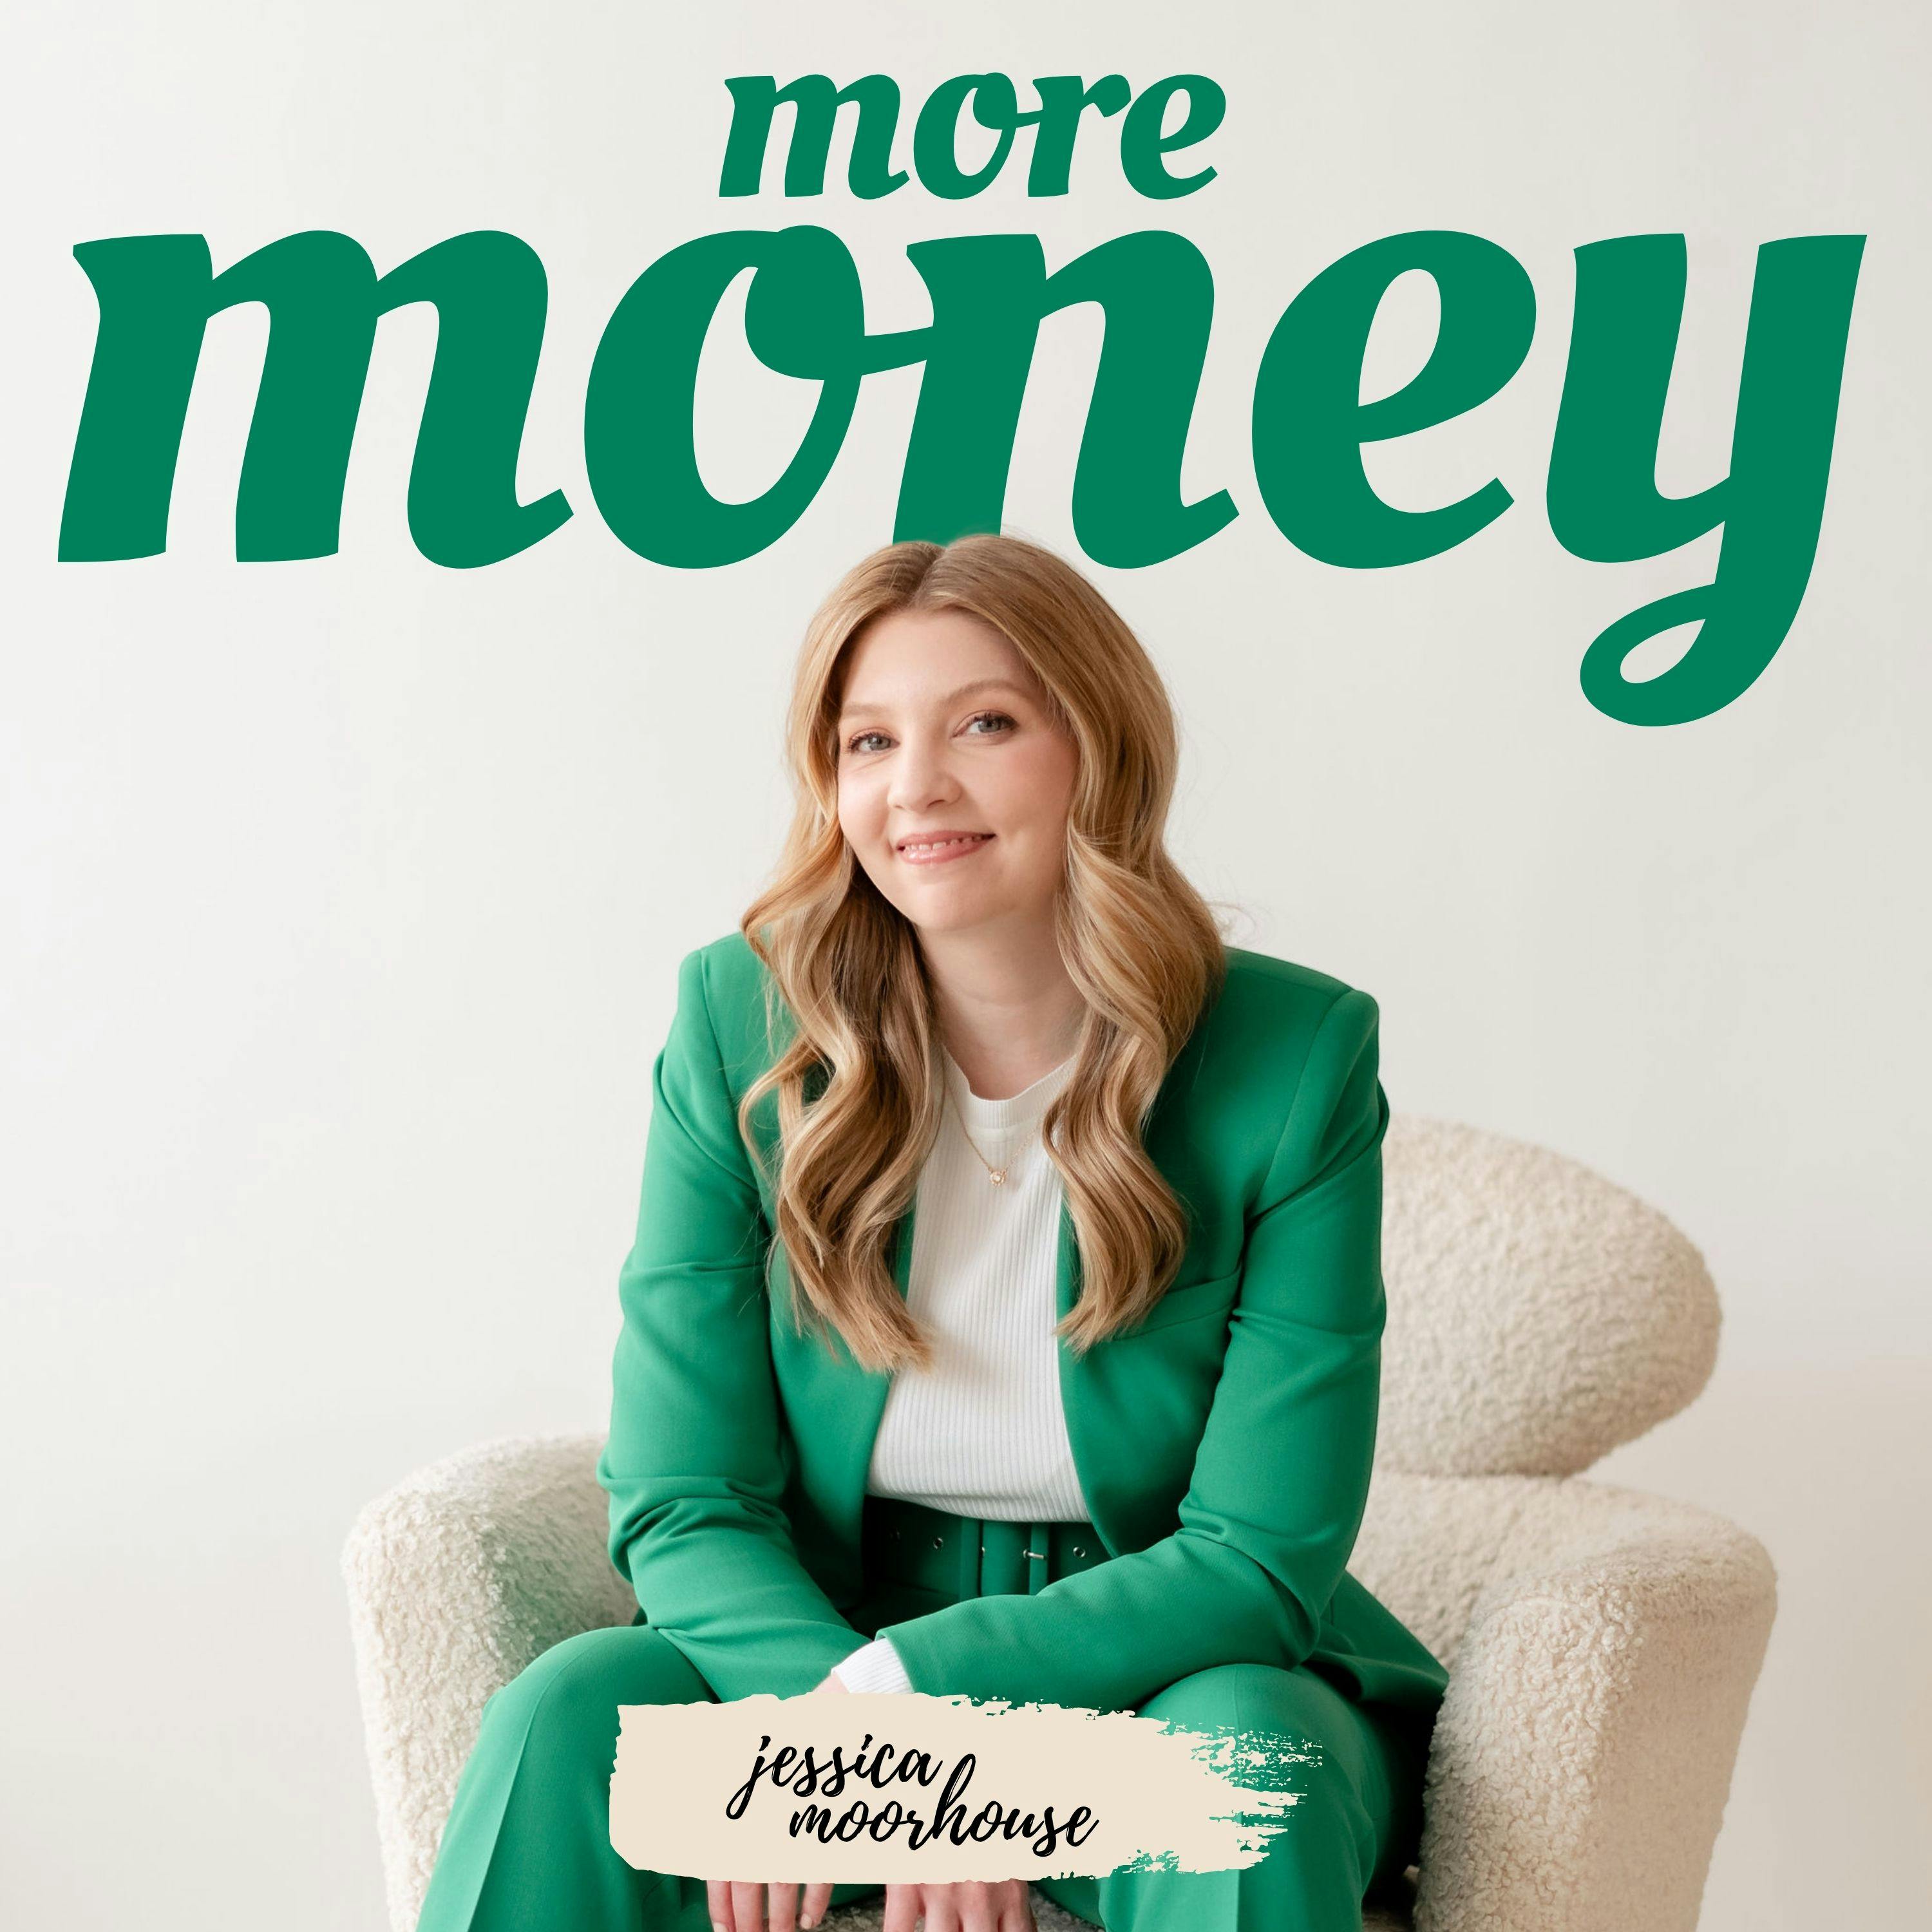 082 Why I Quit My Job to Become an Entrepreneur - Jessica Moorhouse